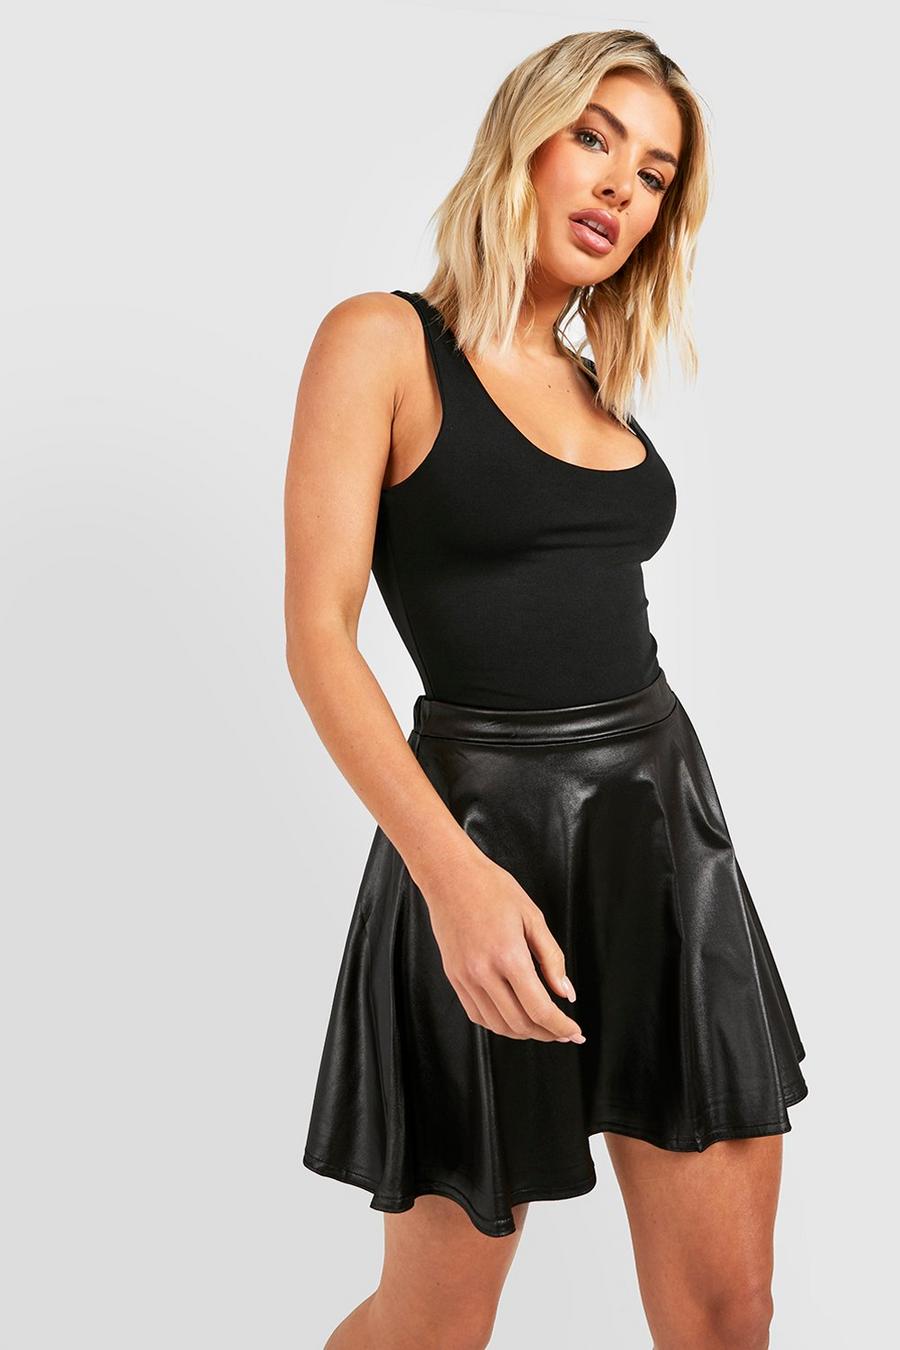  Women's High Waisted Genuine Leather Midi Skirt Flared Skater  Real Leather Skirt Black (Black, X-Small) : Clothing, Shoes & Jewelry